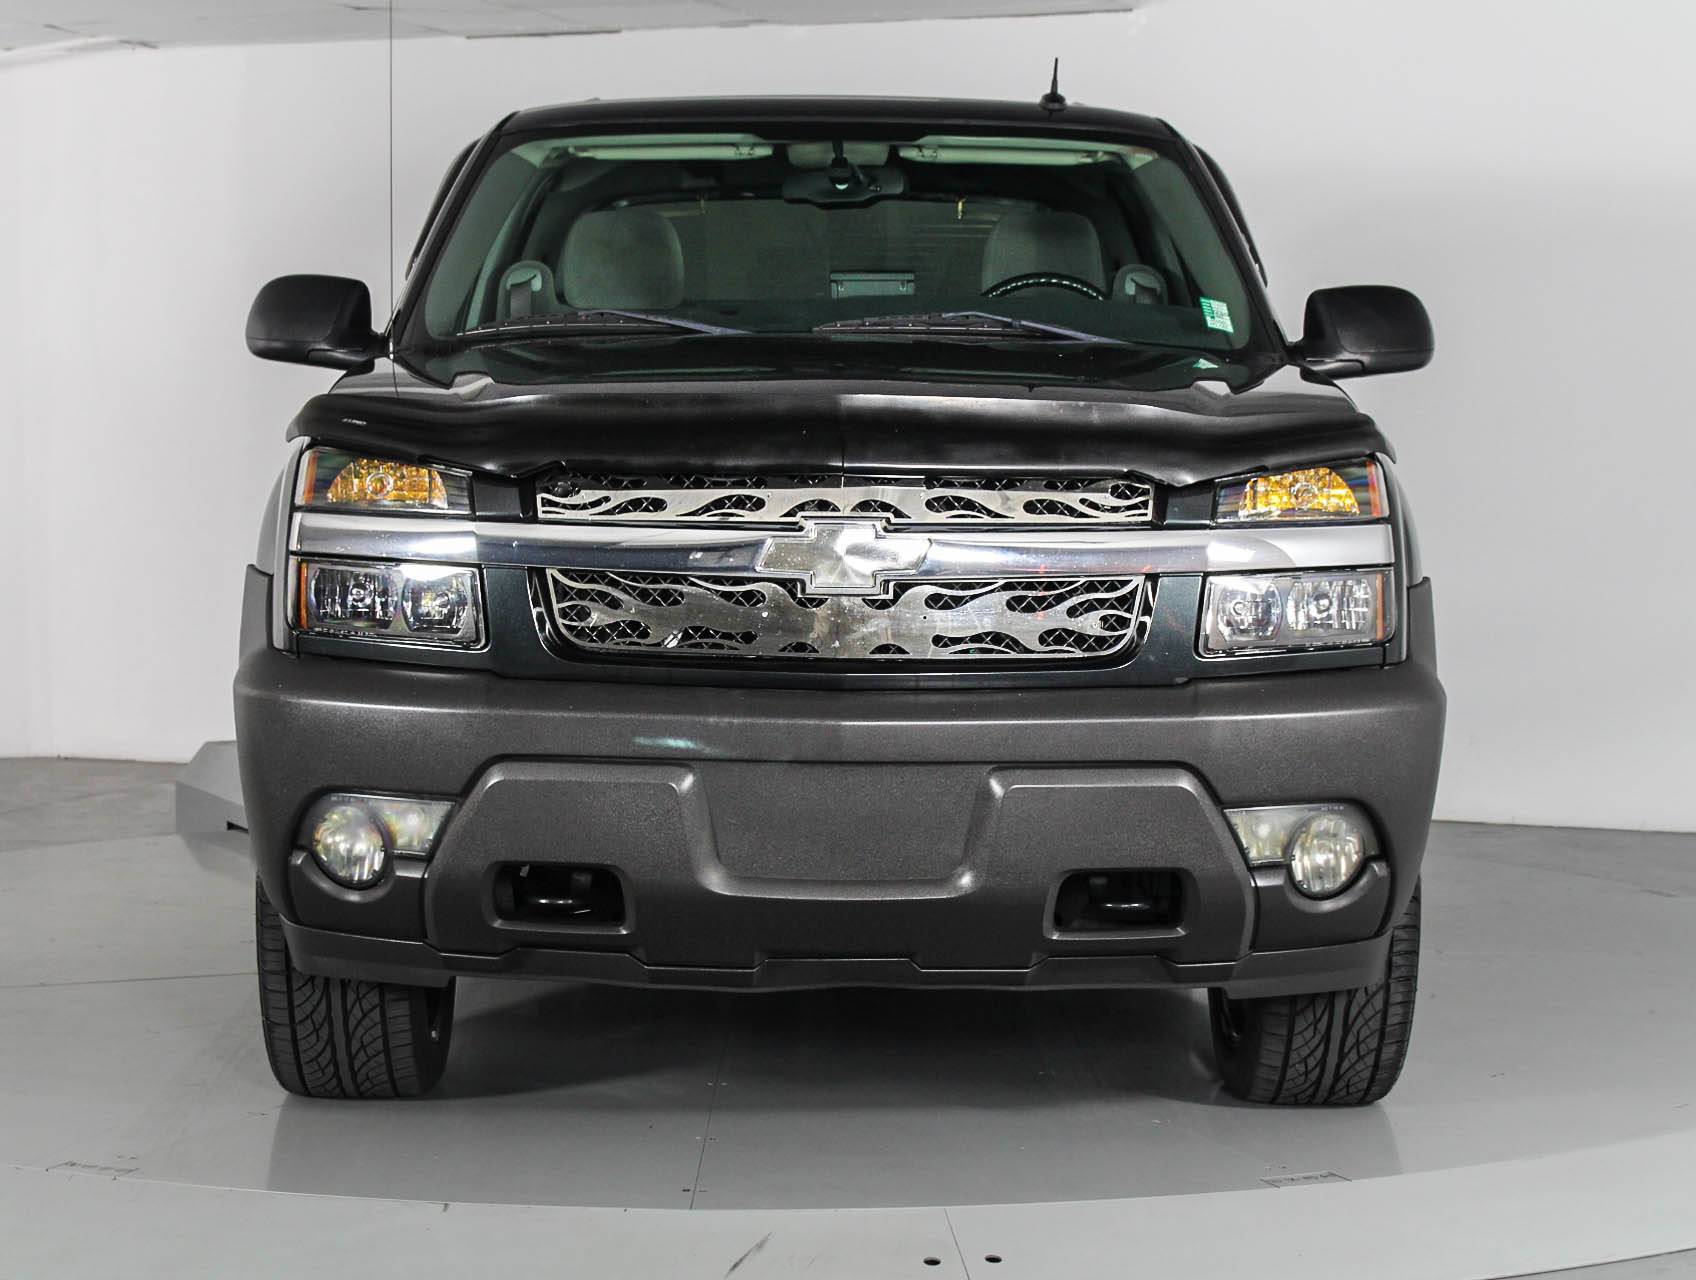 Florida Fine Cars - Used CHEVROLET AVALANCHE 2005 WEST PALM Ls